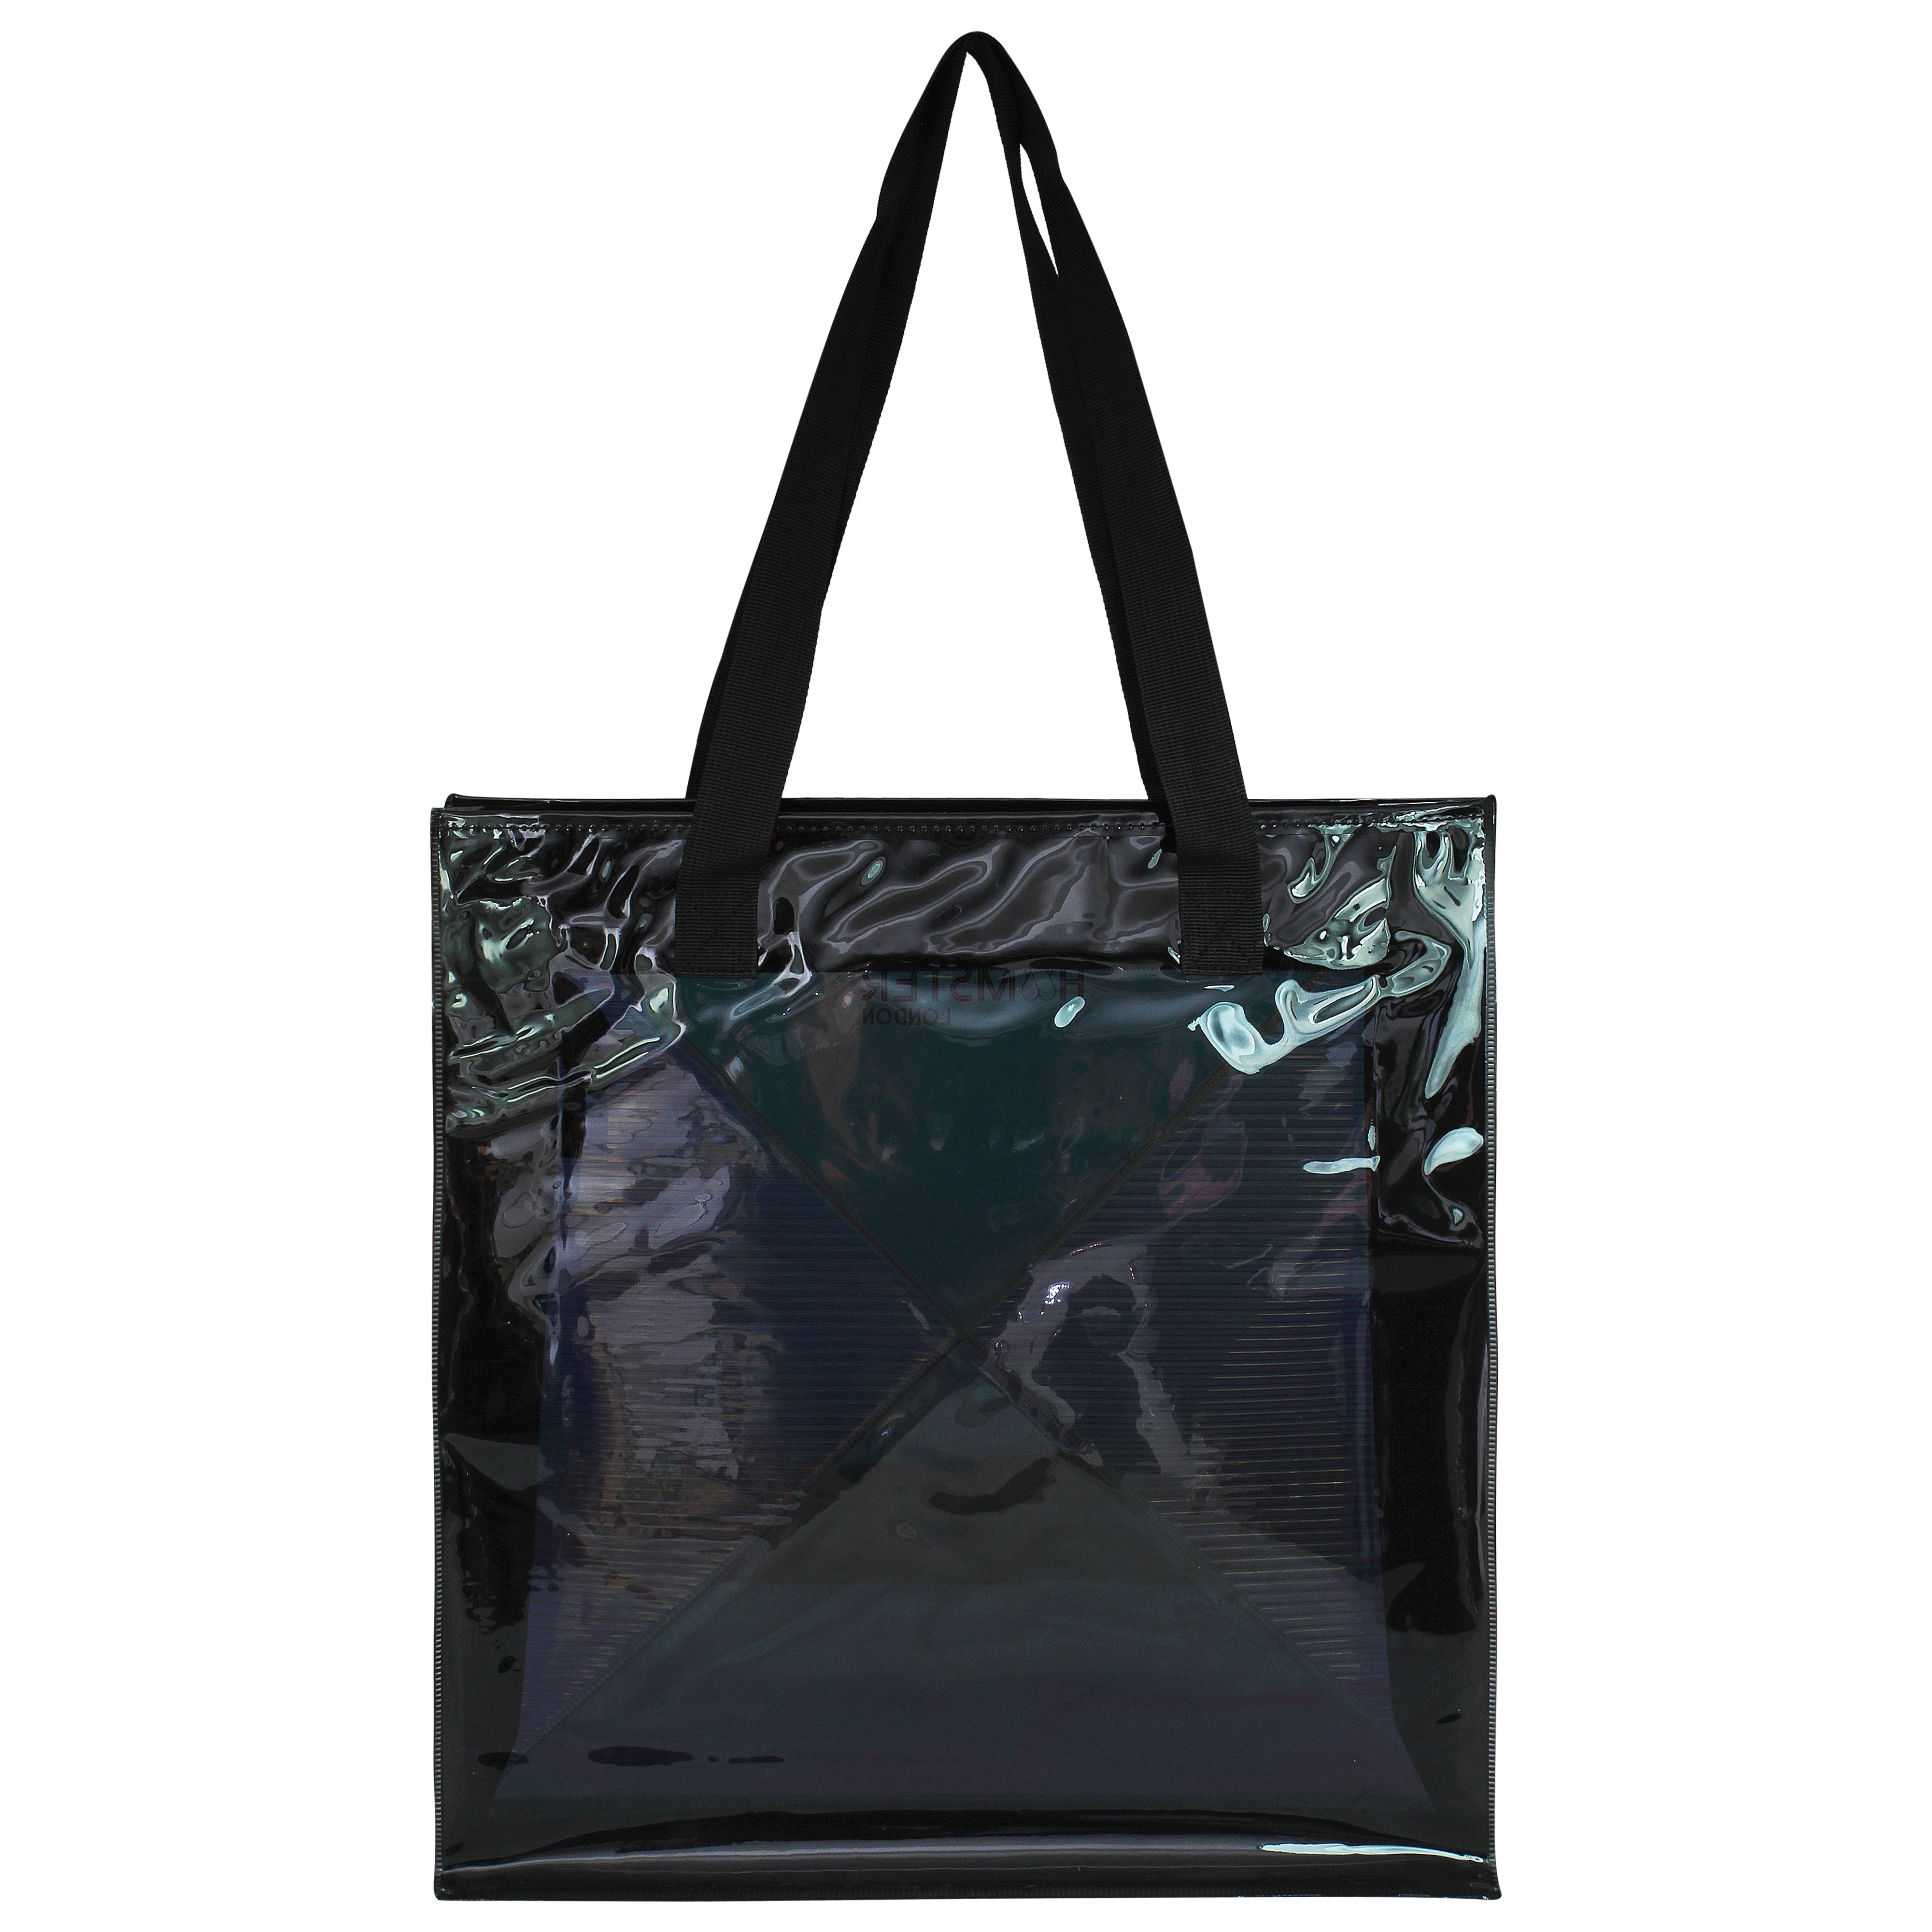 HL Classic Tote Bag Black With Personalization